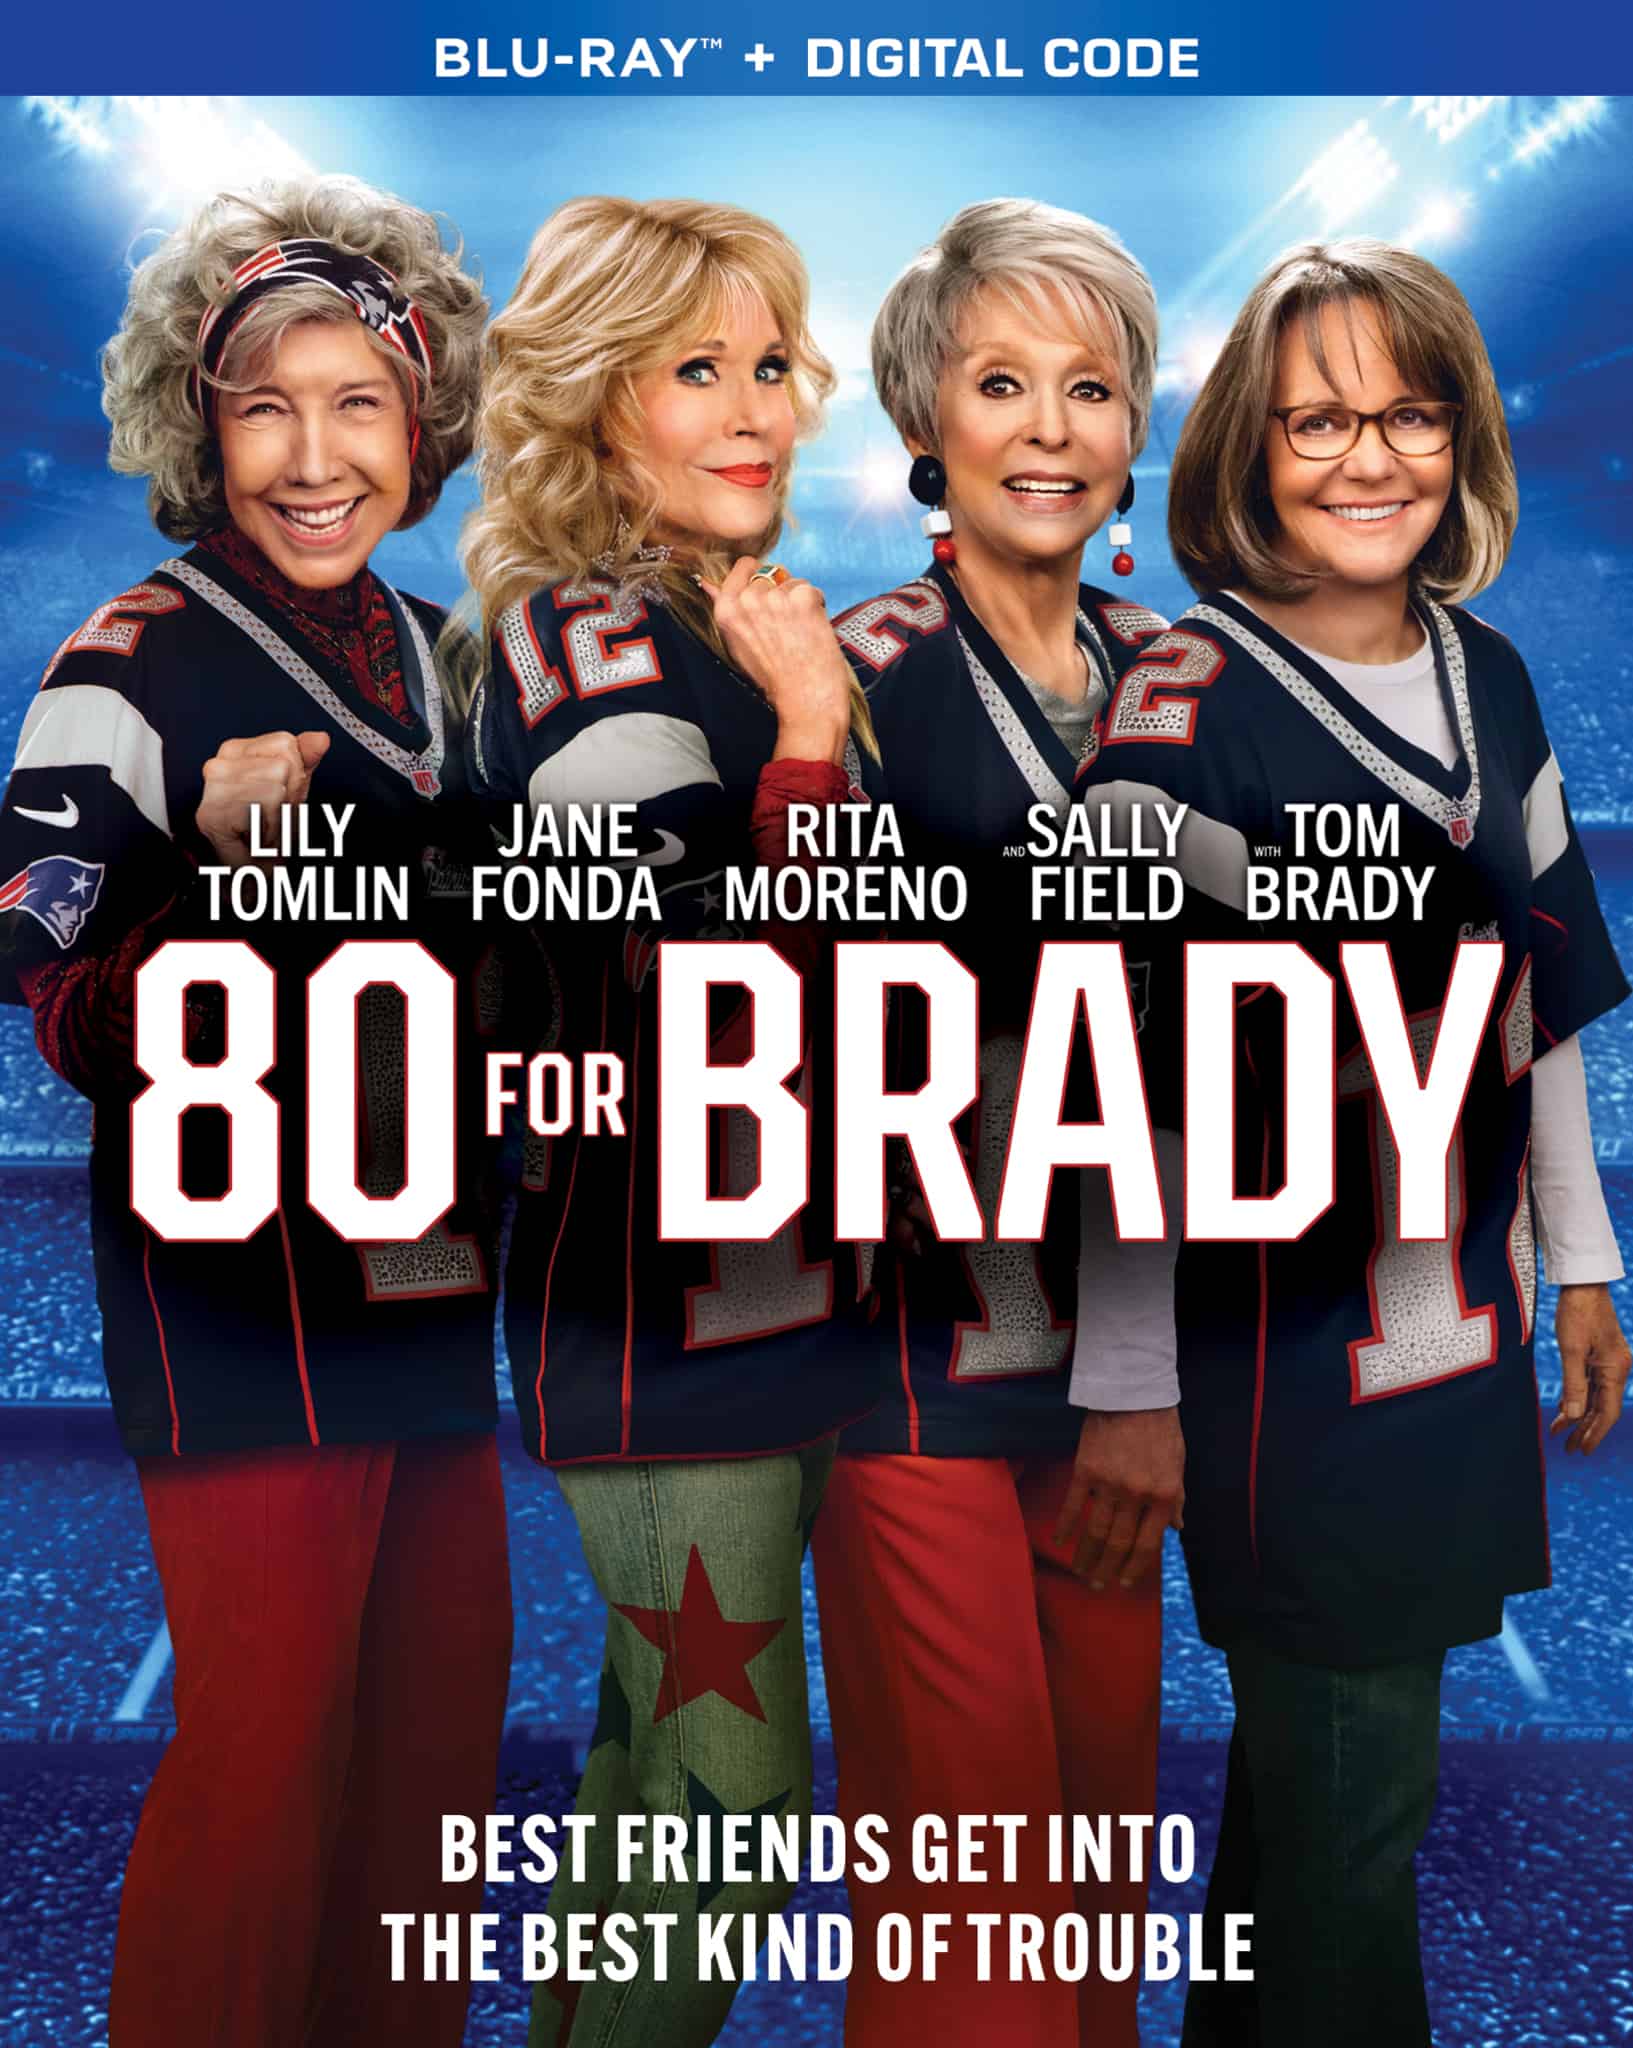 Get Ready for the Ultimate Friendship Adventure with 80 FOR BRADY - Available Now on Digital/PVOD and Coming Soon to Blu-ray/DVD on May 2nd 1